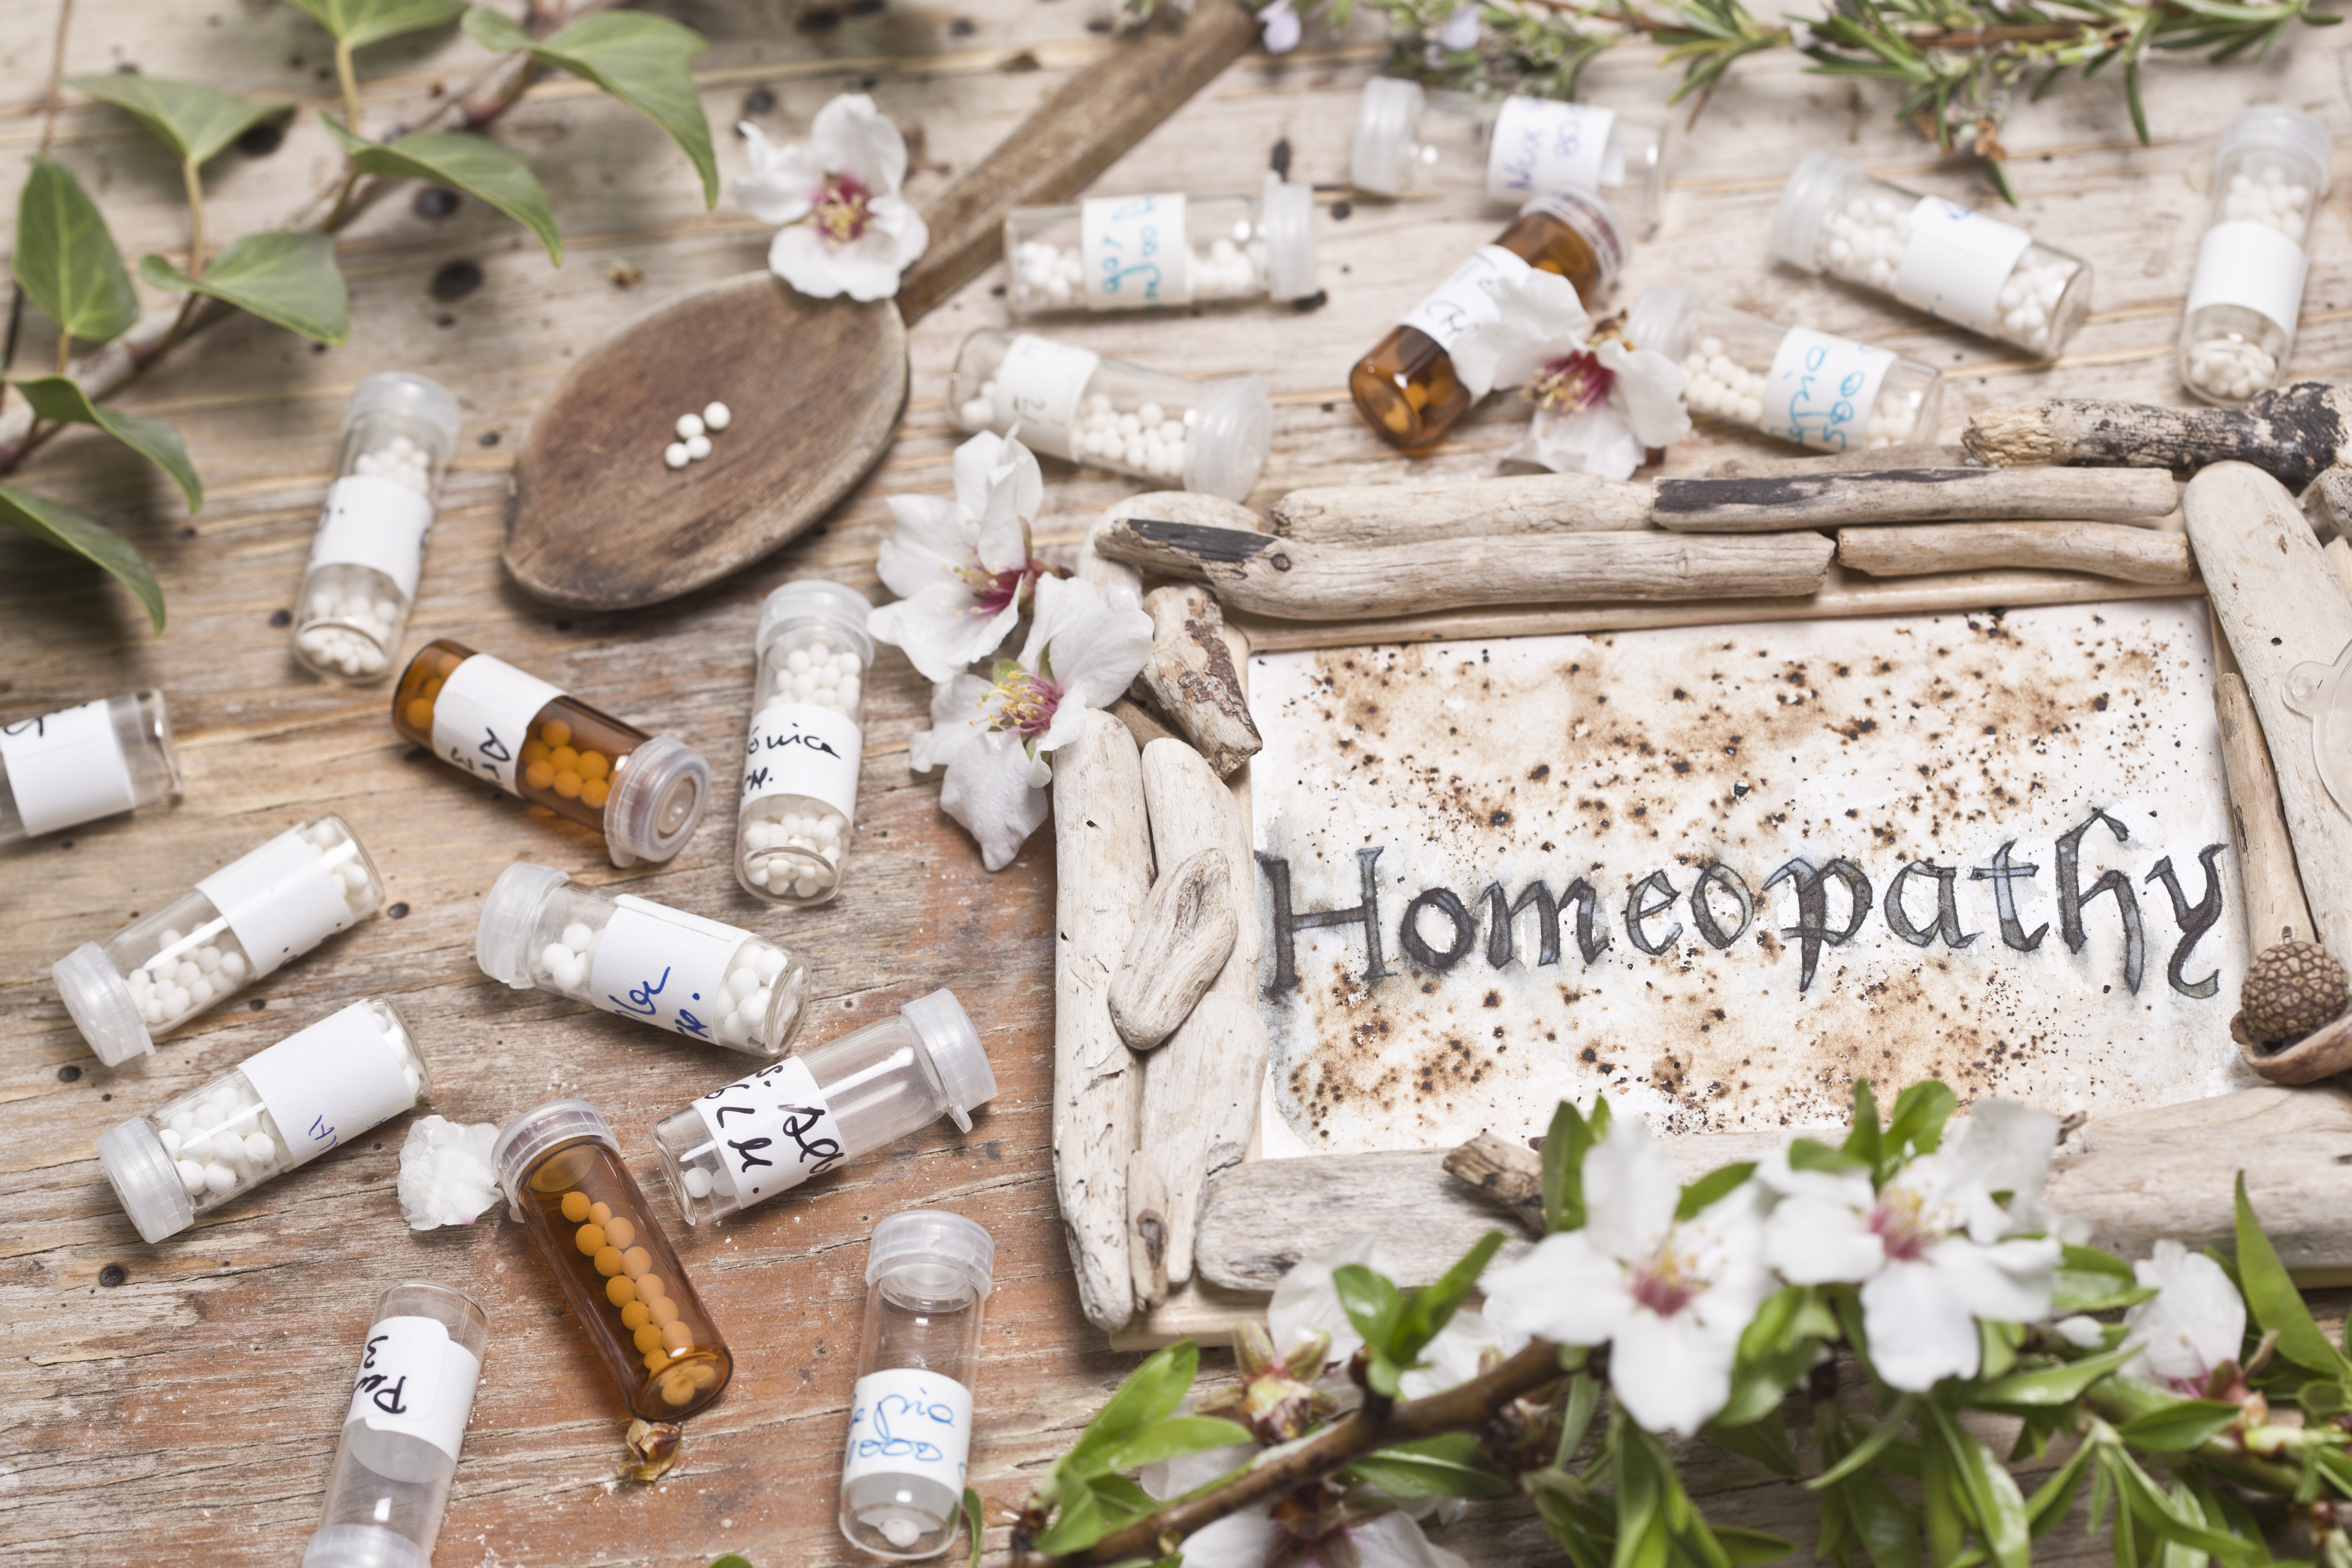 Homeopathy Cold & Flu Remedies